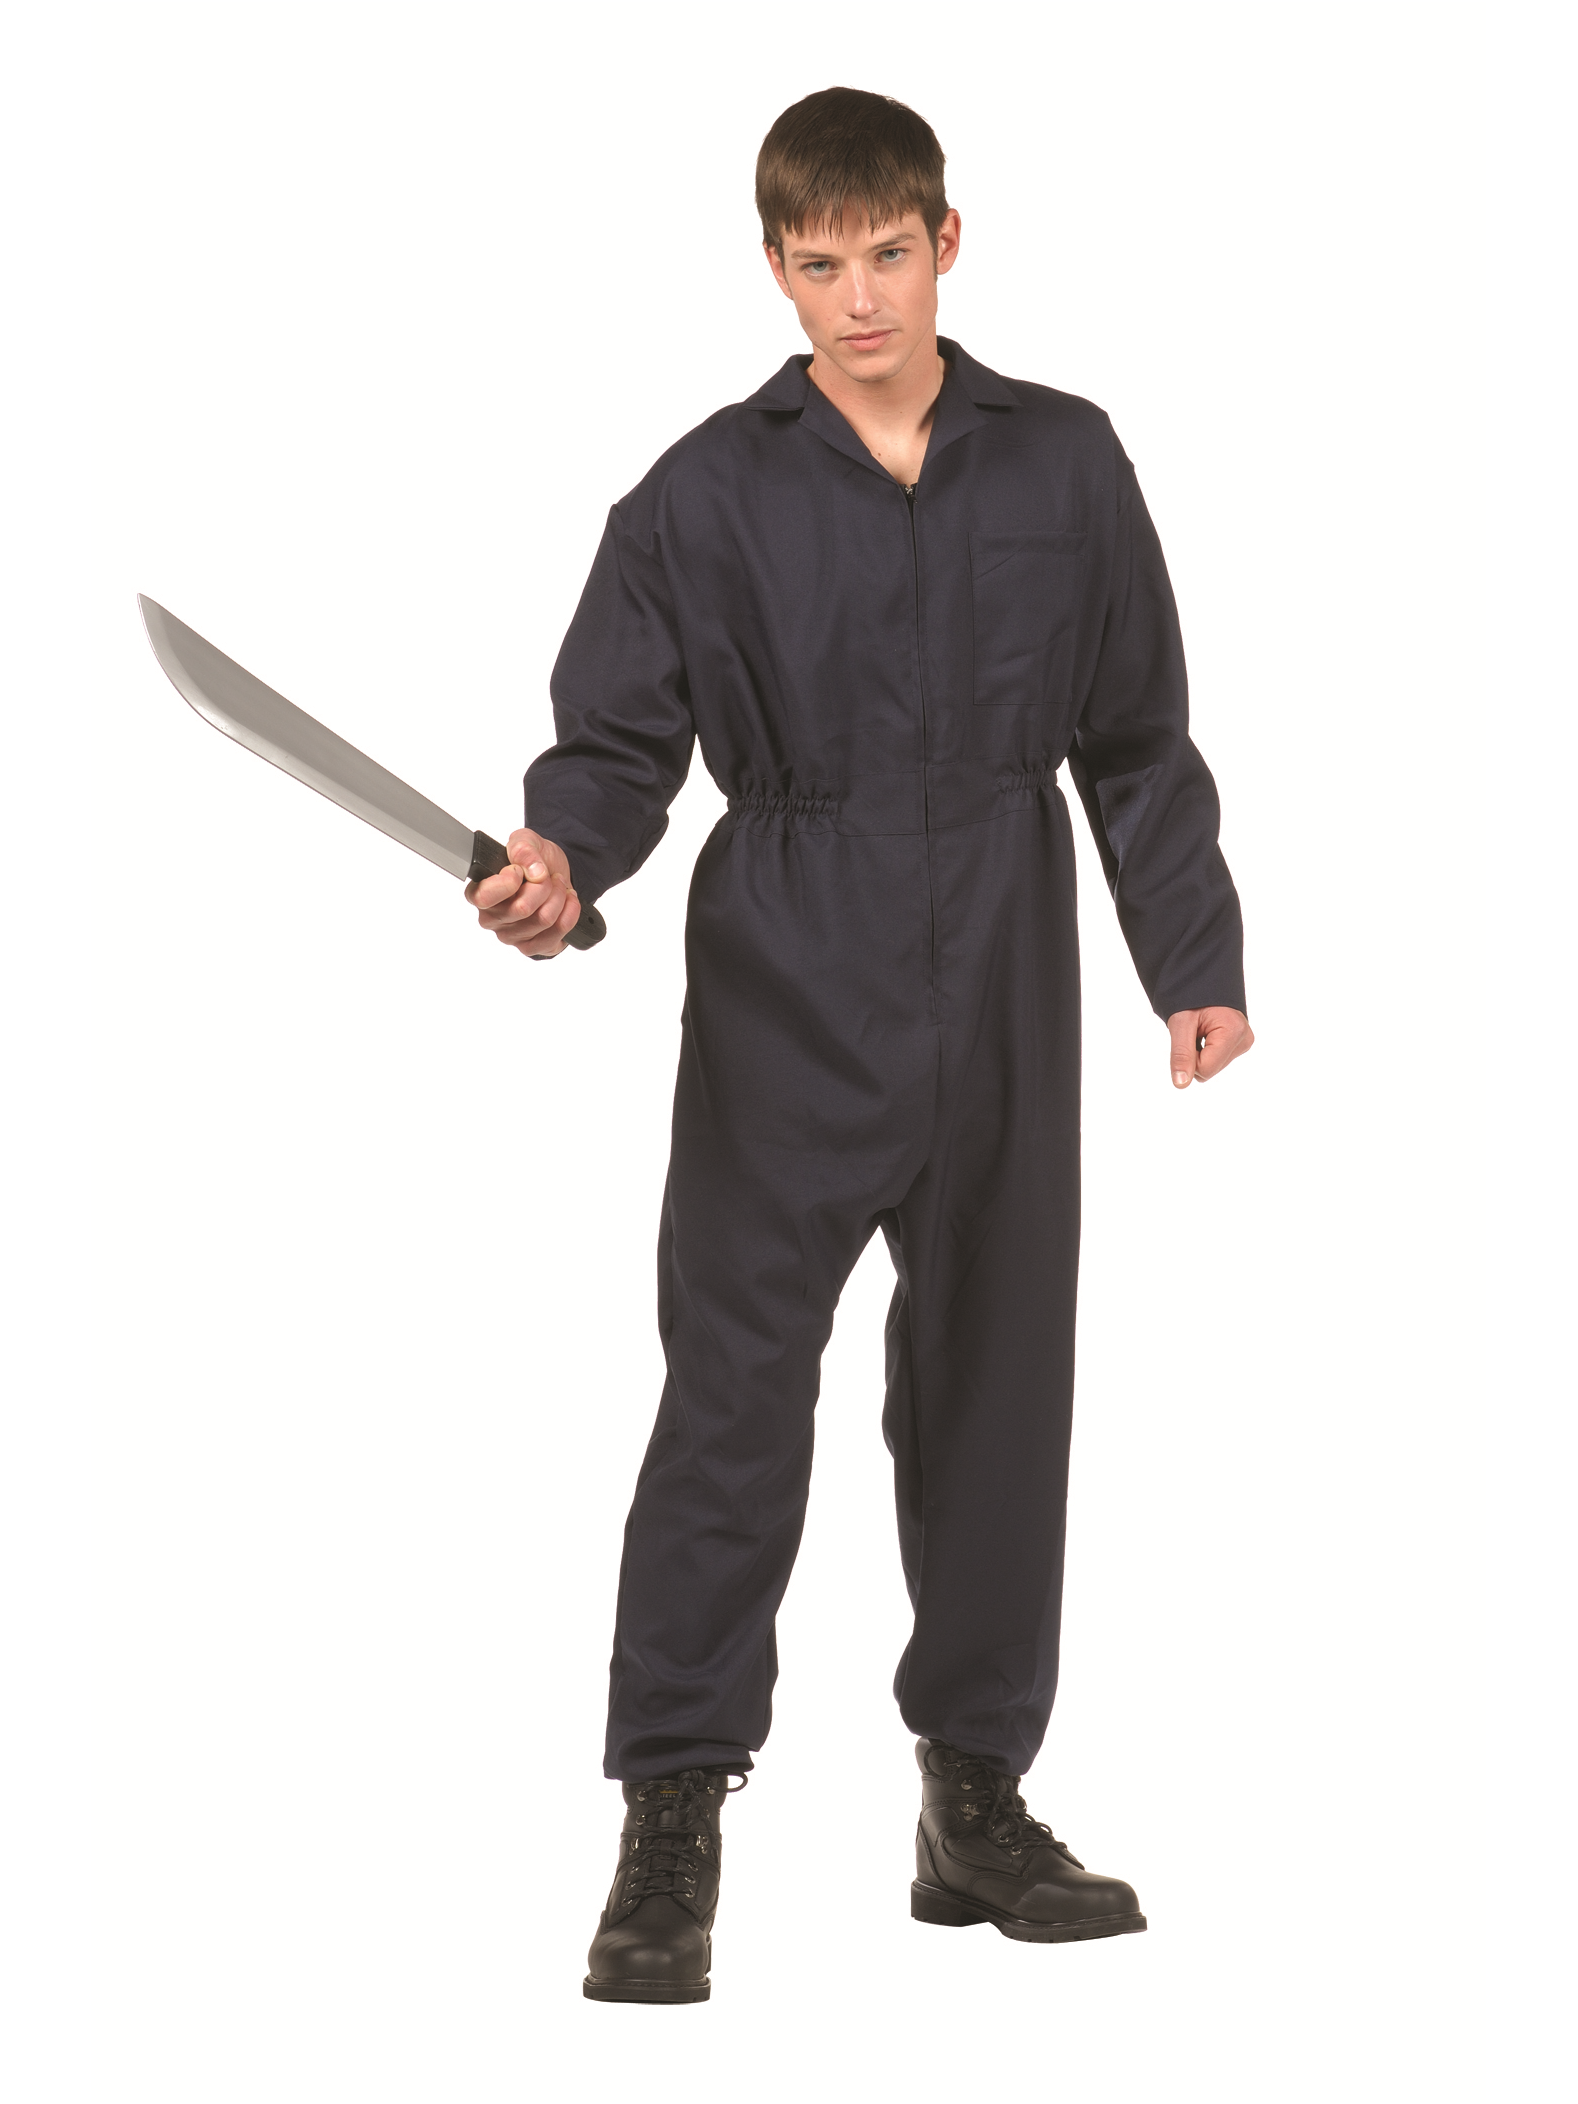 Blue Coveralls Costume - Teen Size